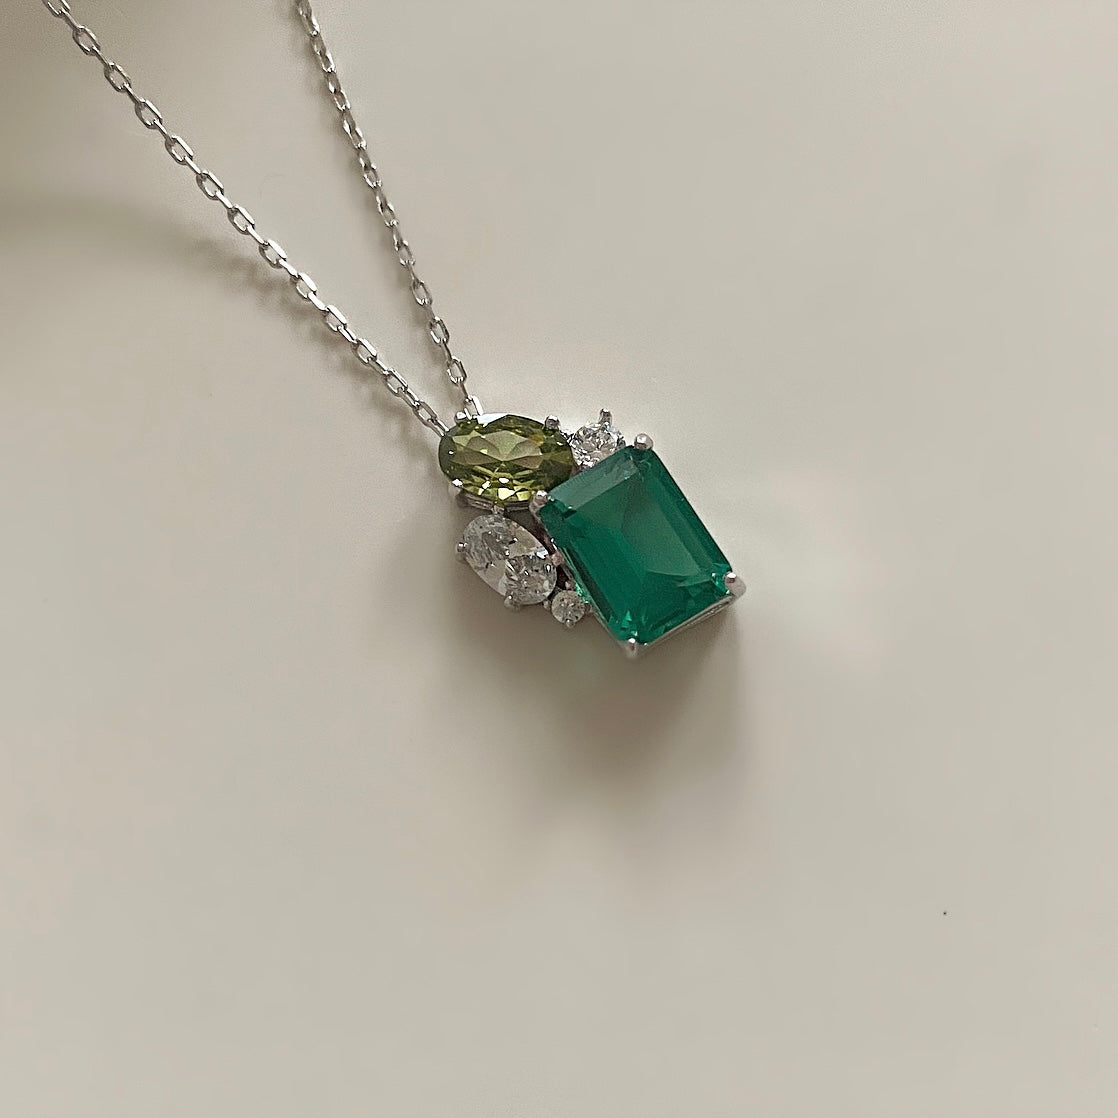 This sterling silver necklace will add a subtle sparkle to any night out. The delicate faceted crystal zirconia stones provide a beautiful and eye-catching contrast of hues of green and olive, pair with green crystal studs for a unique and unforgettable look.  Necklace drop 23cm